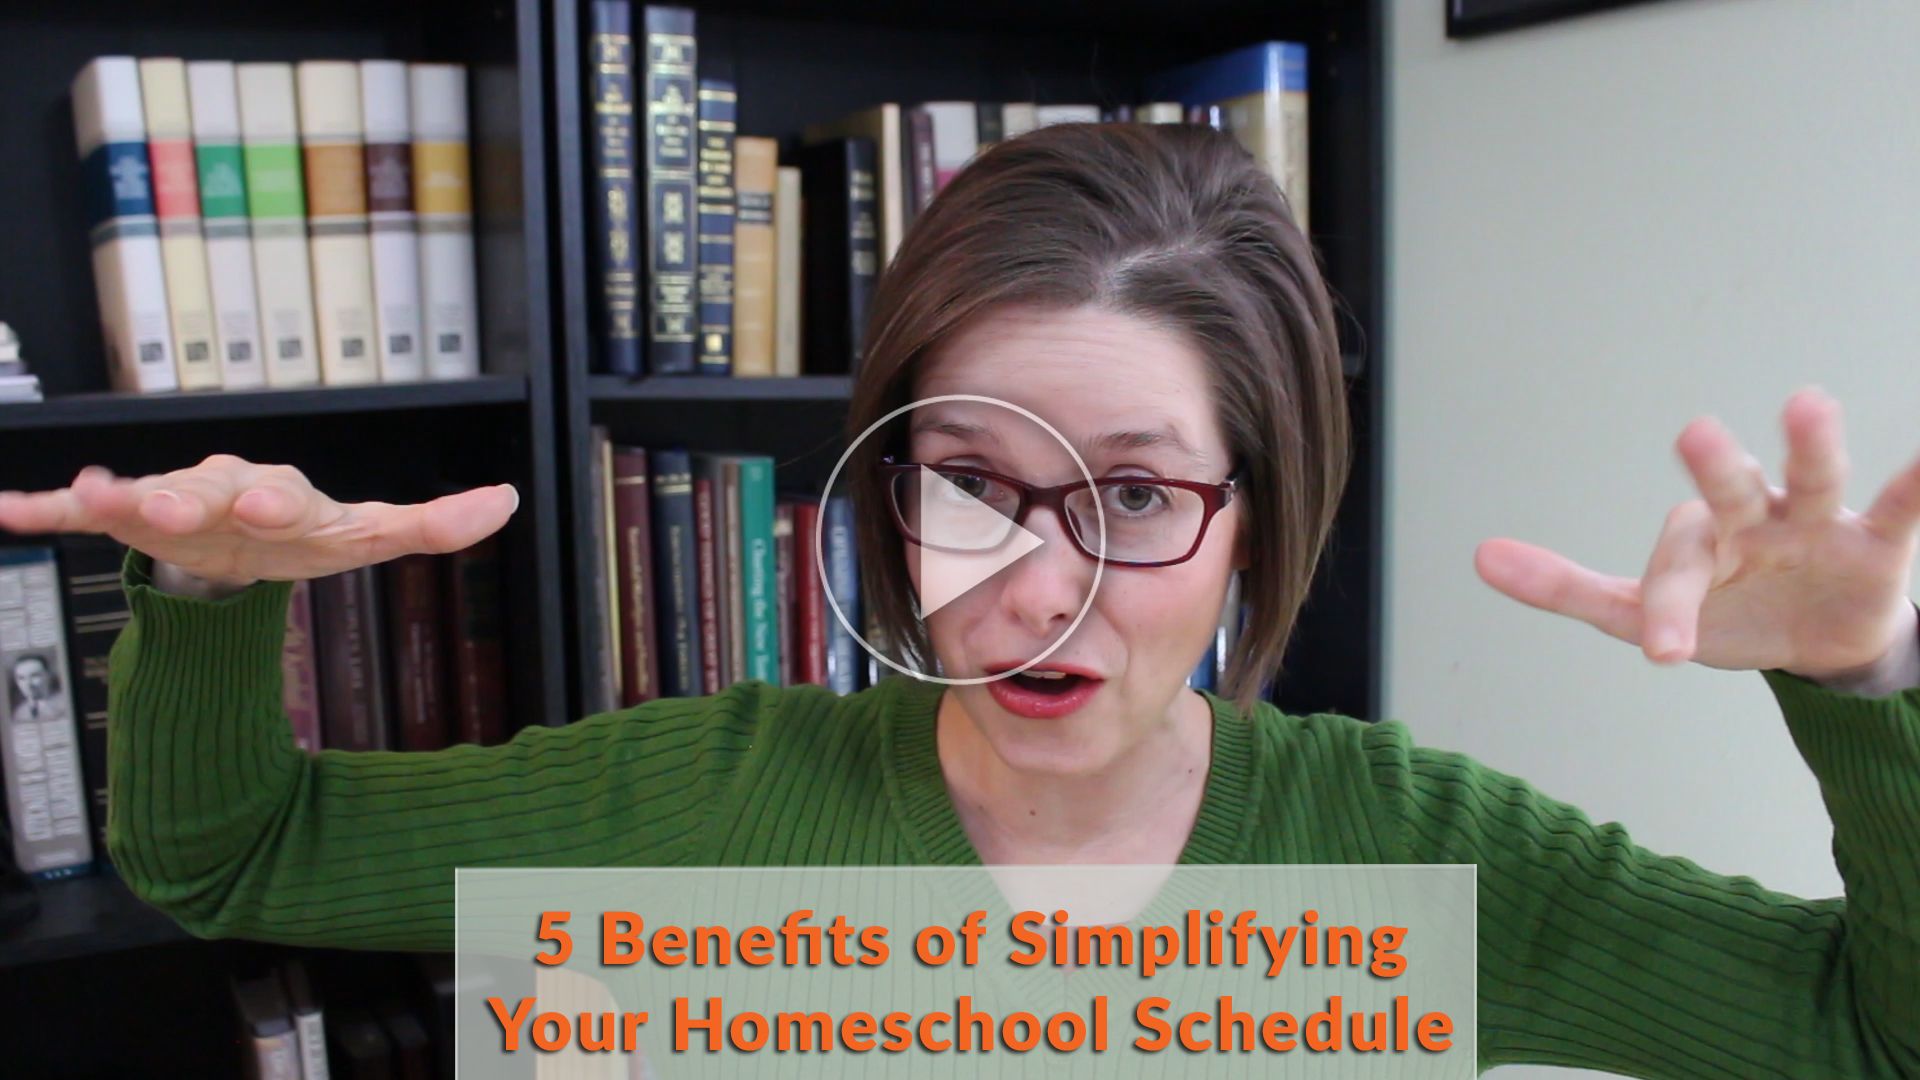 One of the biggest reasons I’m still homeschooling is because over the years, I figured out how to simplify my homeschool. What we did each day got less complicated and faster to put together. I paired our homeschool schedule waaaaaay back. And my stress went down. And the success went up!  | Simplify homeschooling | simple homeschool schedule | minimalist homeschool | how to simplify homeschool |